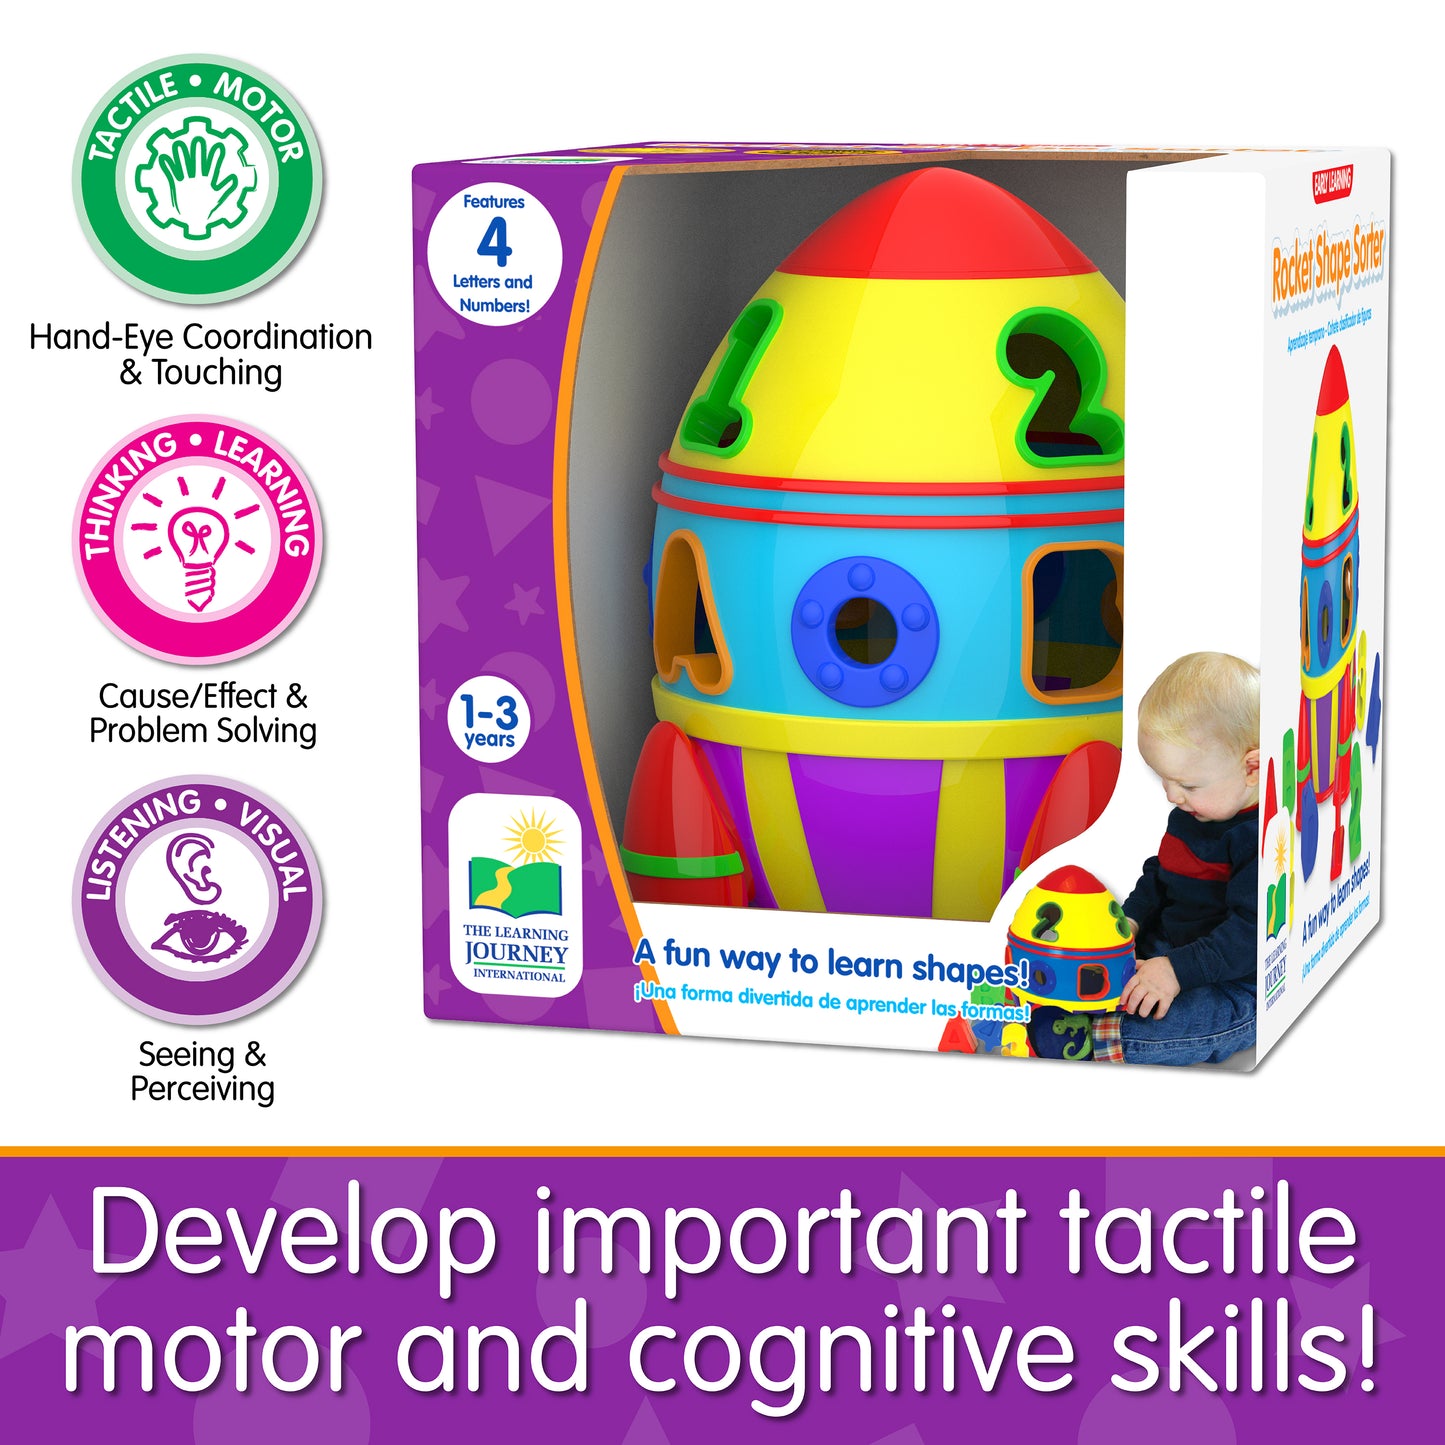 Infographic about Rocket Shape Sorter's educational benefits that says, "Develop important tactile mnotor and cognitive skills!"